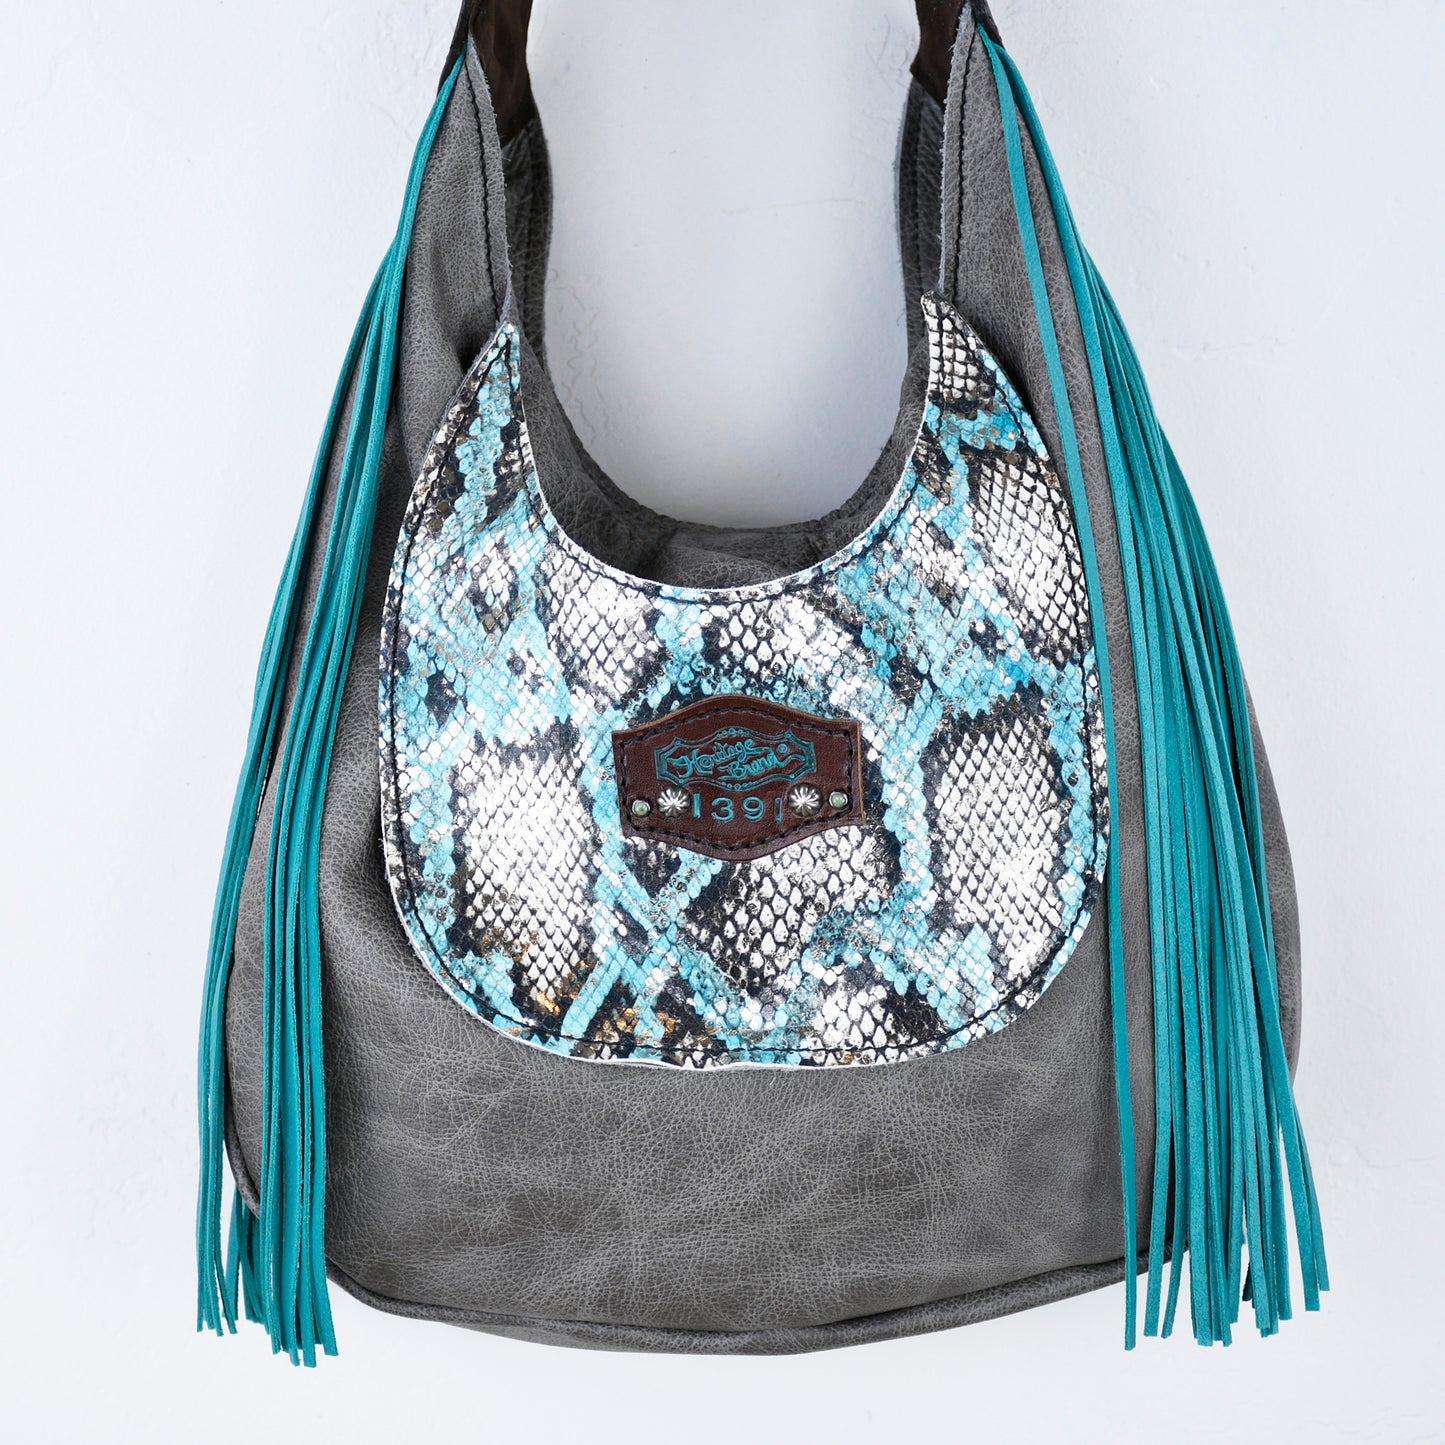 
                  
                    A turquoise and gray marilyn bag #643 with a snakeskin pattern and fringe detail by Heritage Brand.
                  
                